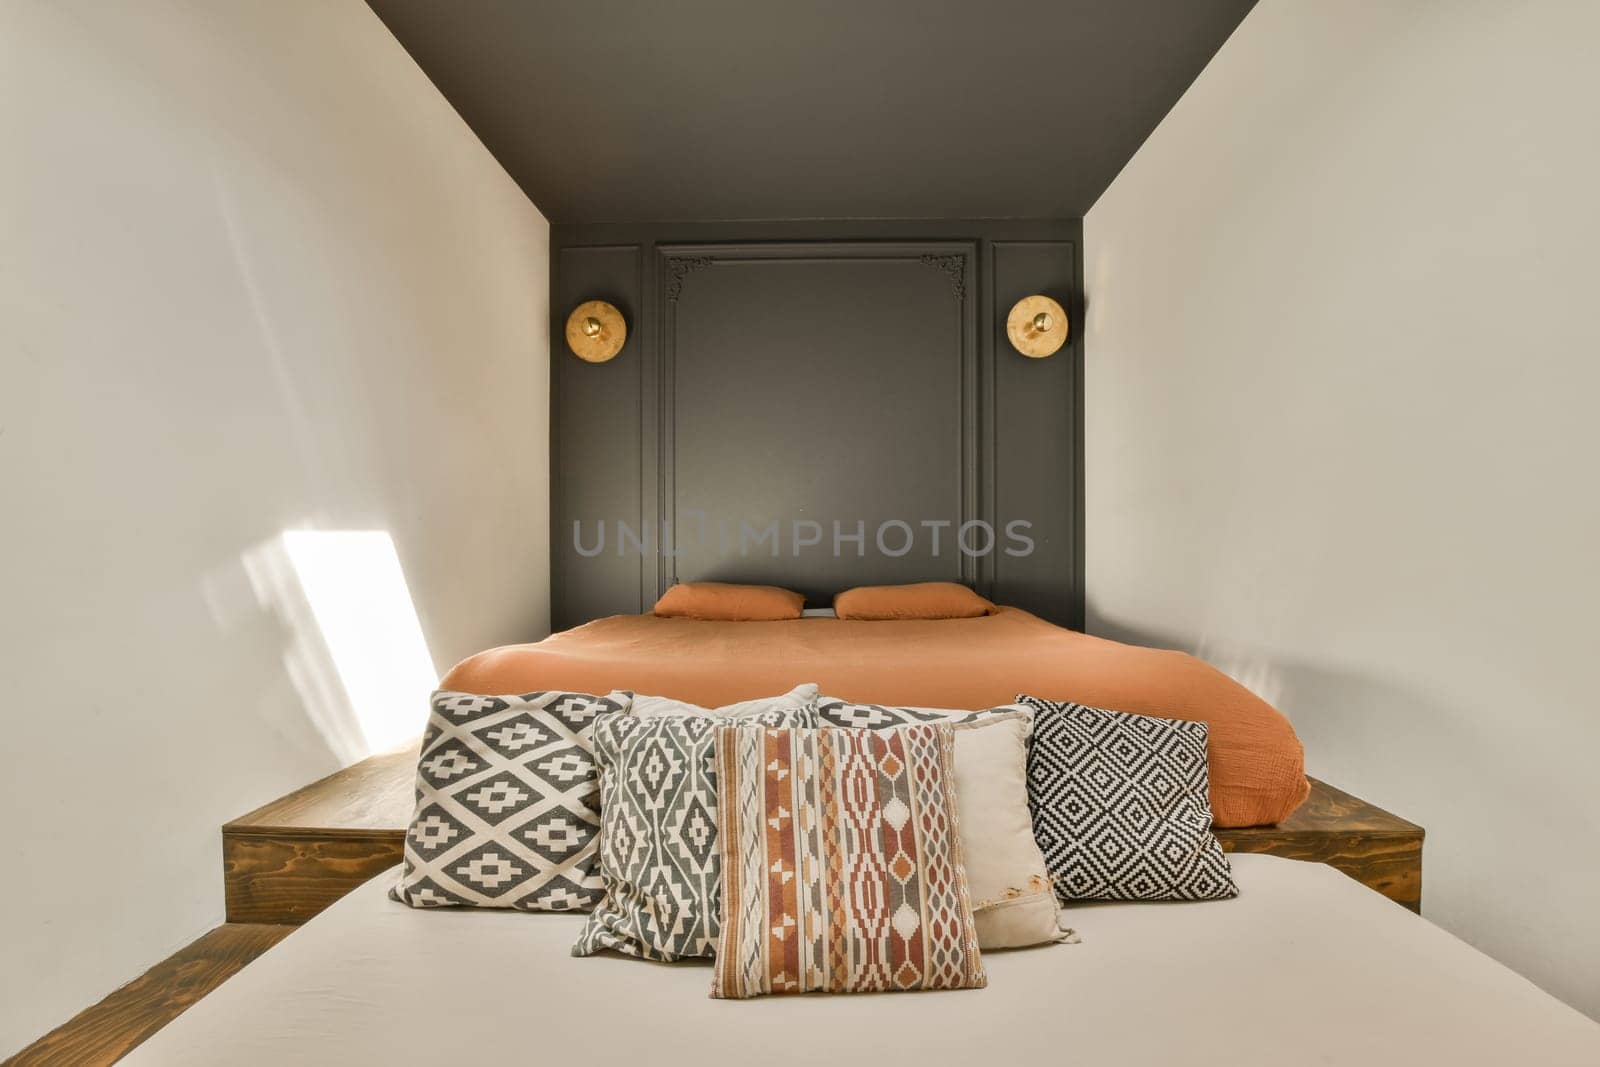 a bed in a room with white walls and black trim around the headboard, pillows and pillow on it